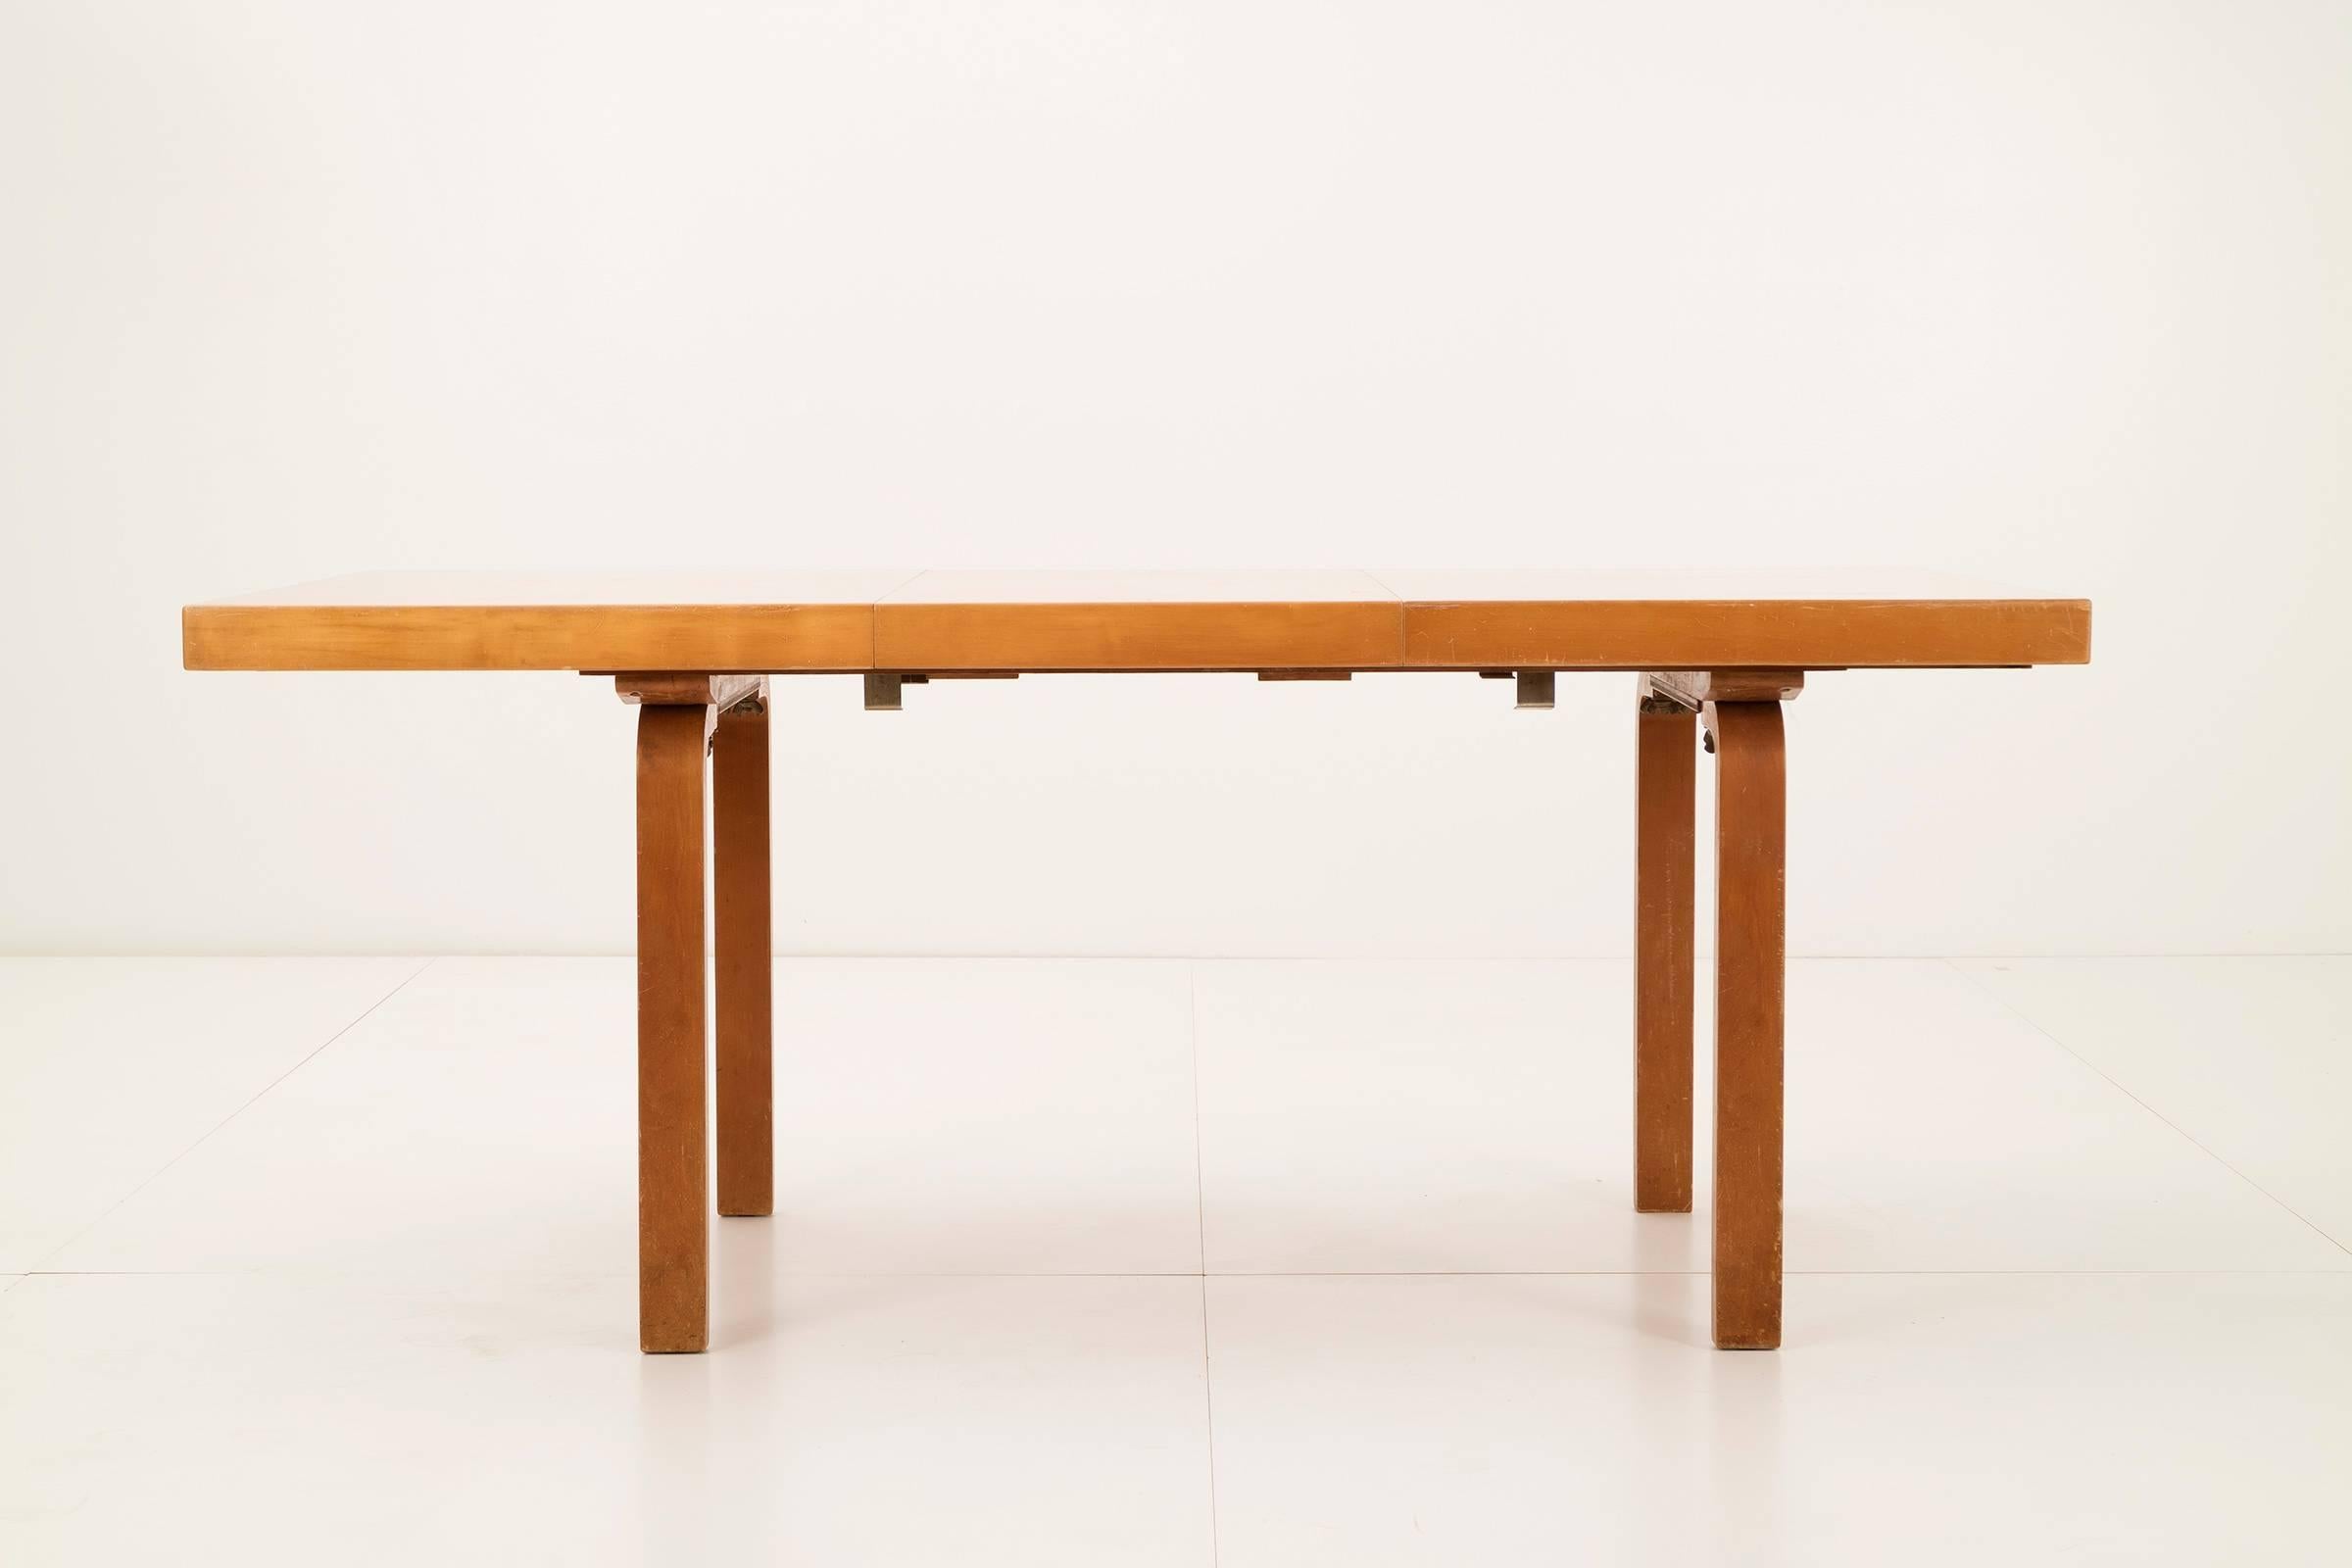 Alvar Aalto extension dining table for Arteck. Model H92. This dining table included two table leaves, 19.75 in. each that extend to 90.5 in. When table is not extended there is a beneath the top to store the leaves.